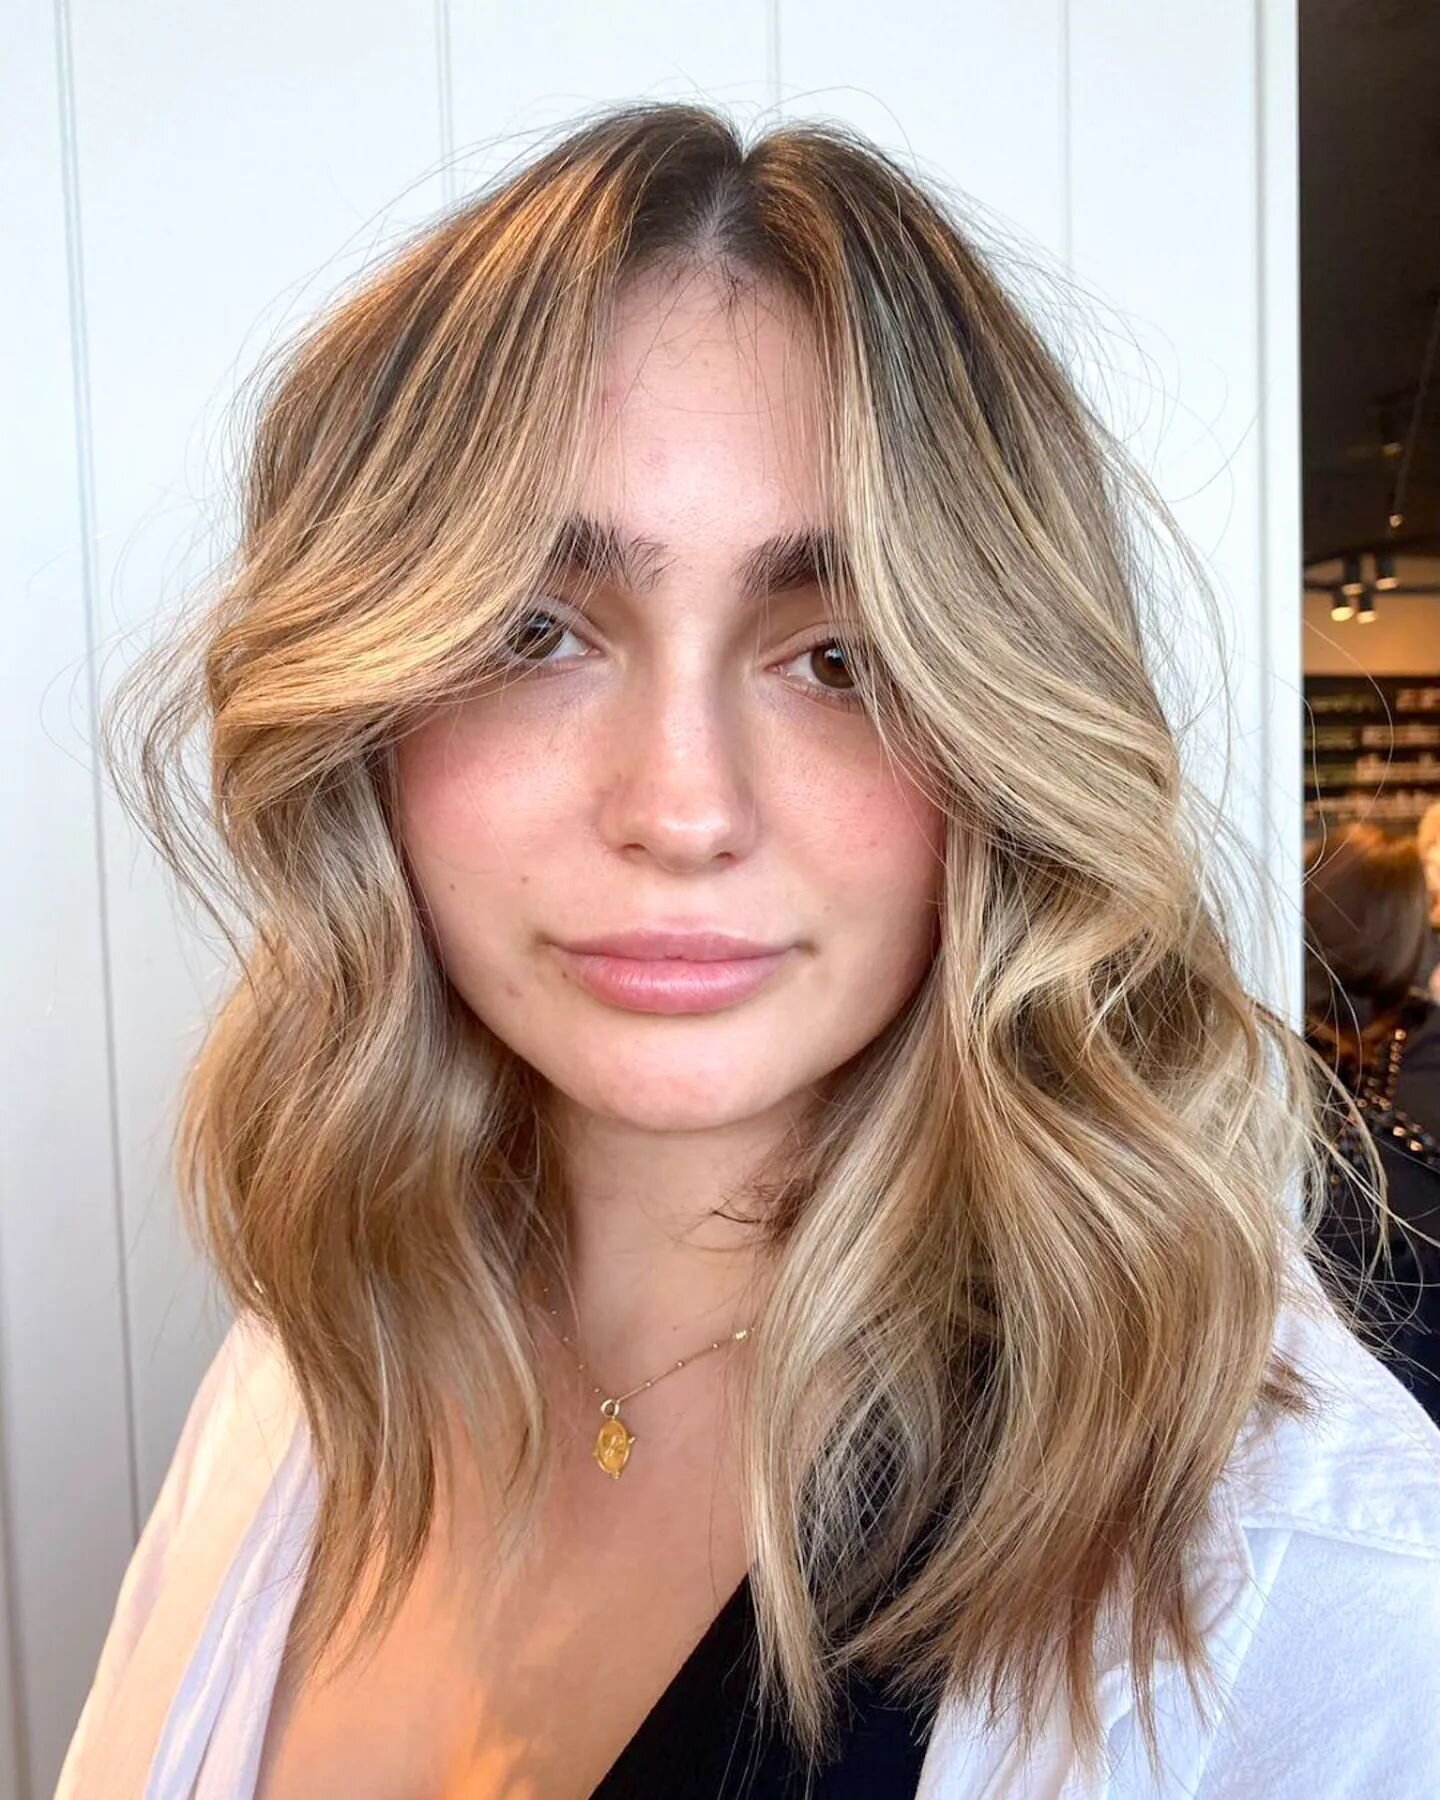 Soft blends for this beauty. 
Using our favs @keuneanz.